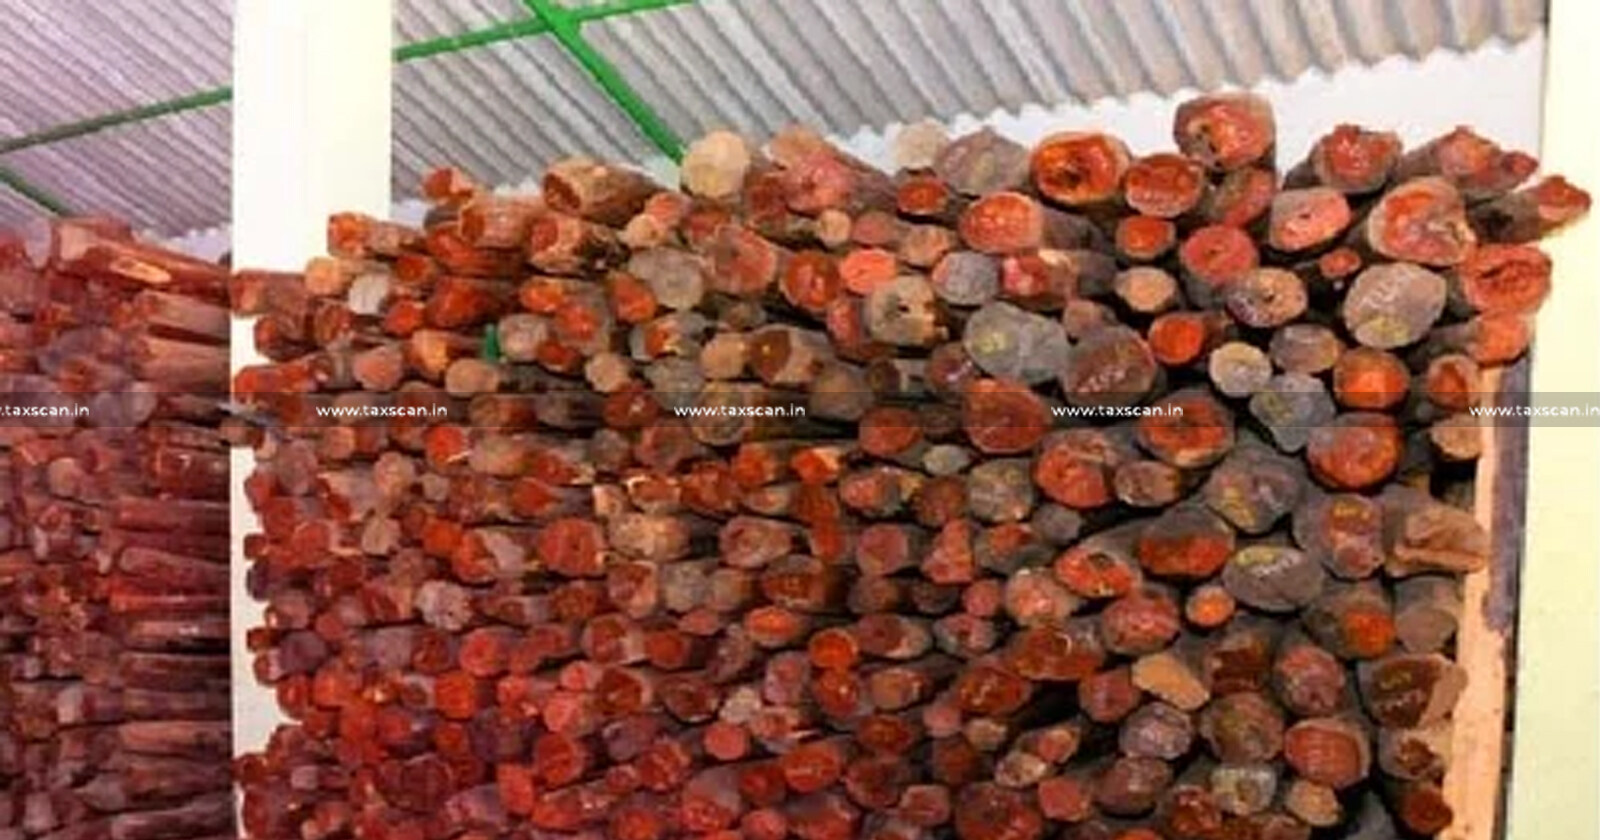 Illegal Removal of Seized Red Sanders by CCSP - CESTAT upholds Penalty under Customs Act - TAXSCAN